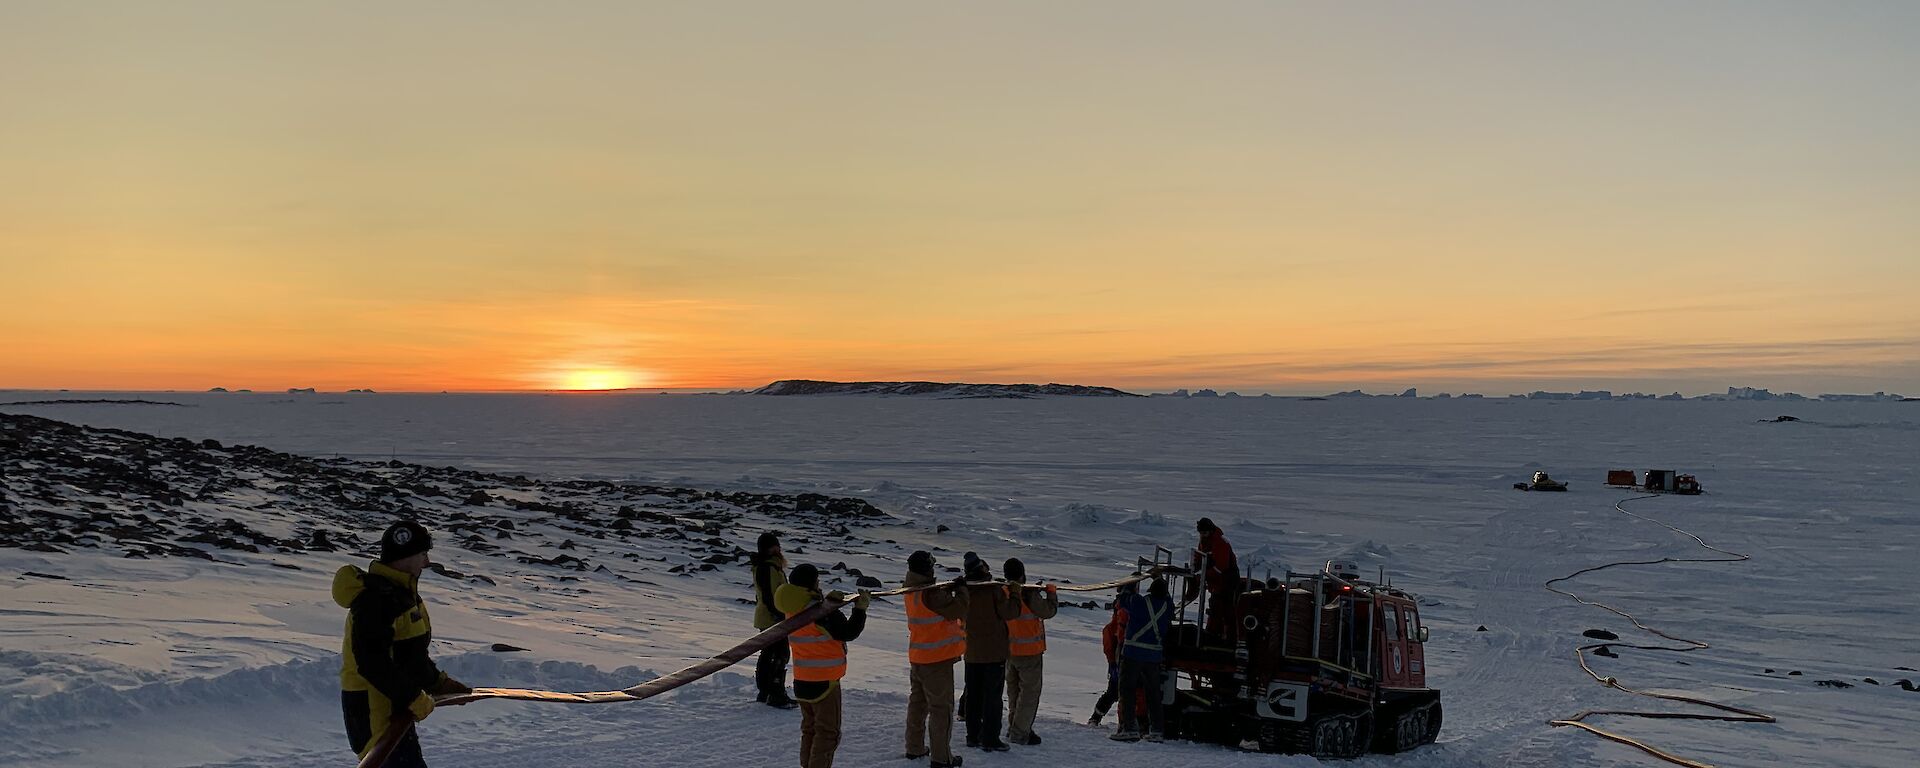 People in a line holding a hose being fed into a hagglund on the ice, with a sunset on the horizon.